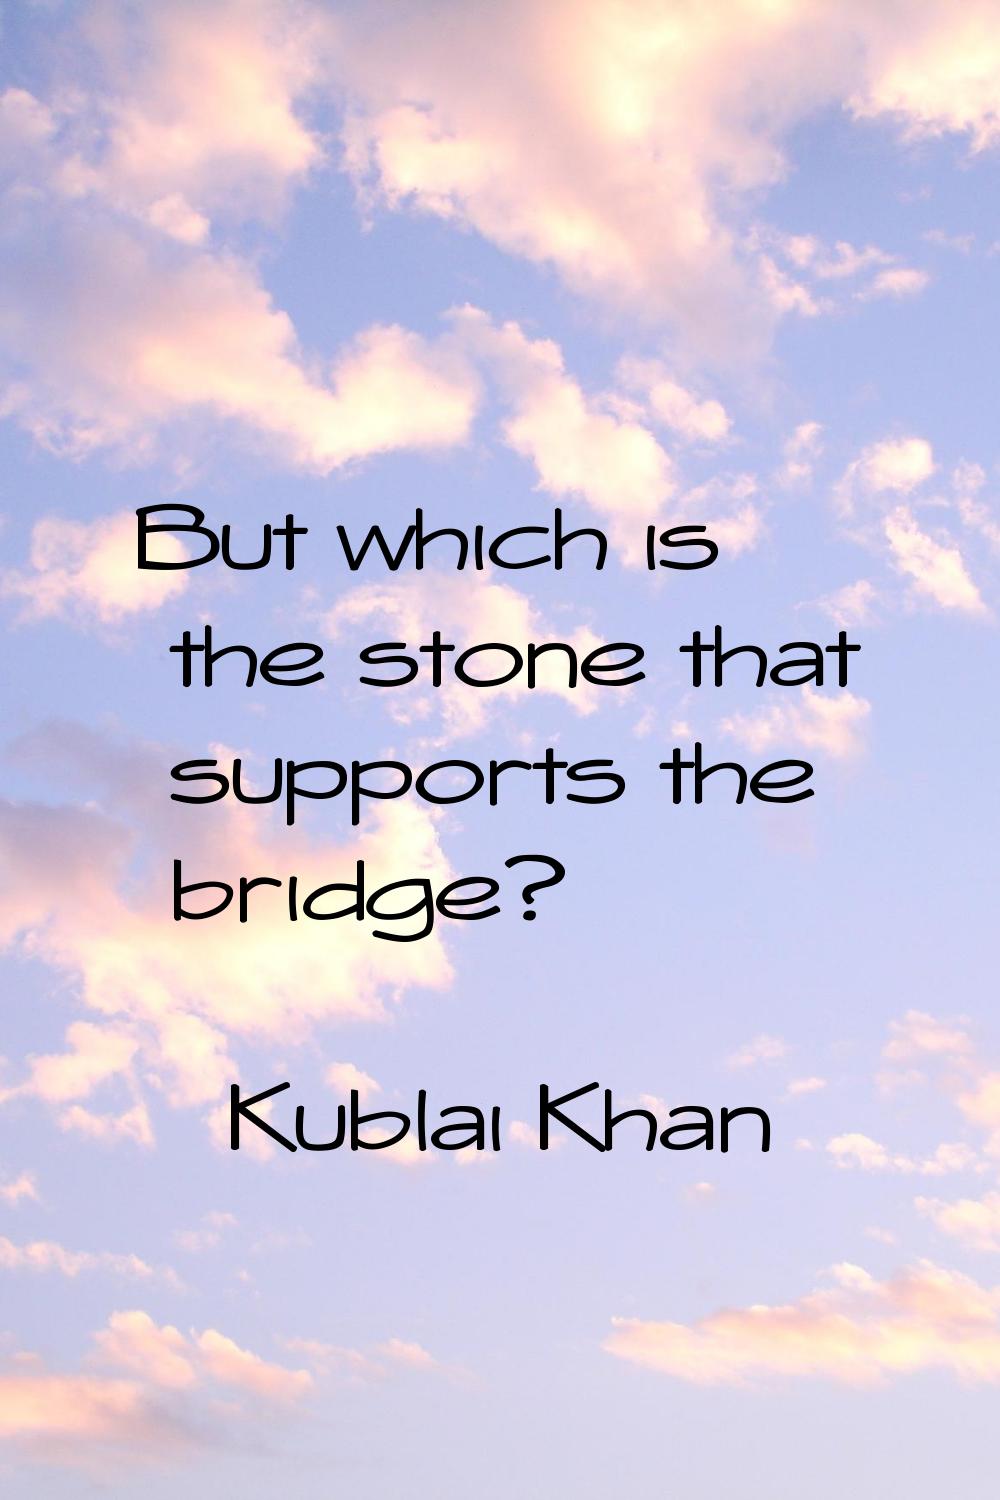 But which is the stone that supports the bridge?